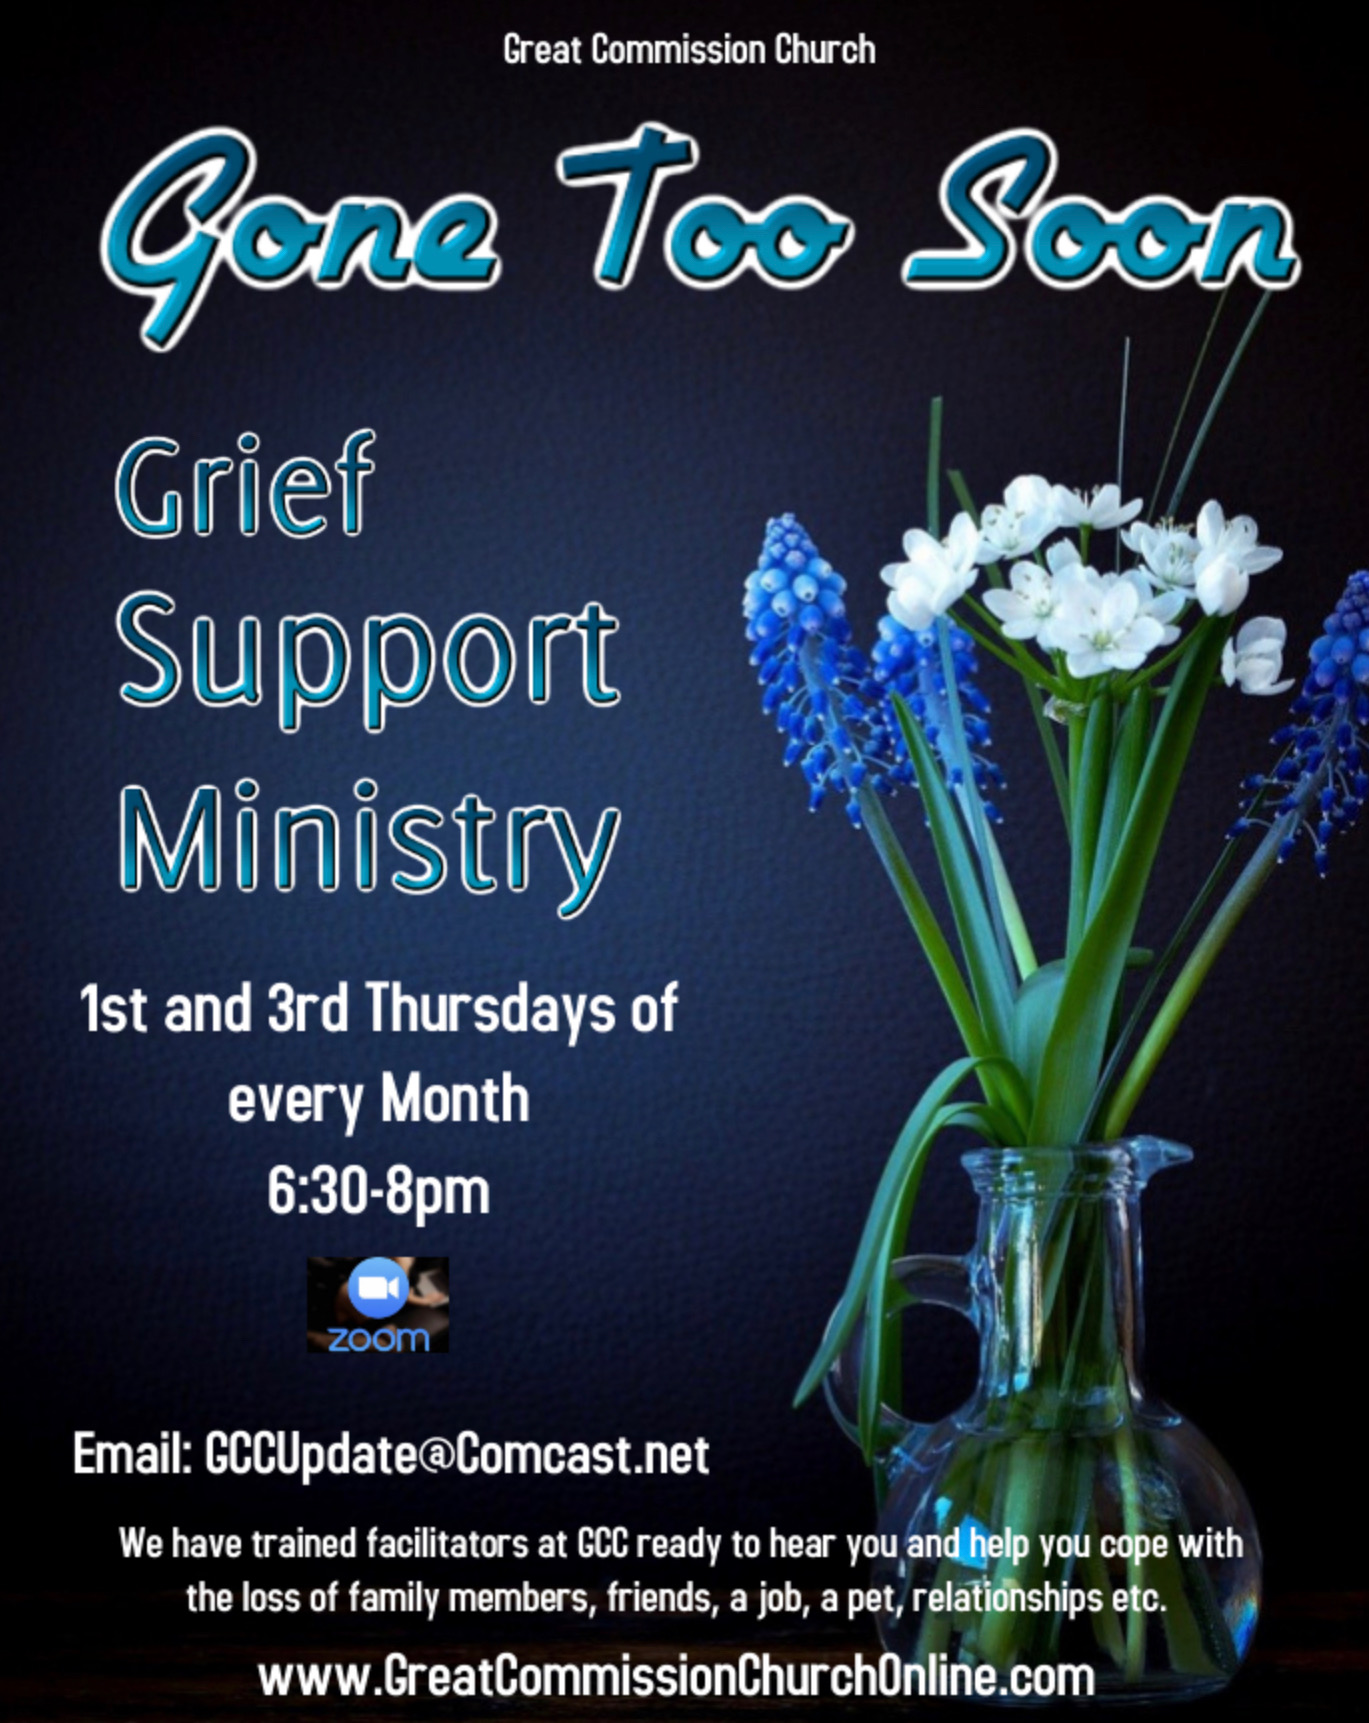 GCC Gone Too Soon Ministry